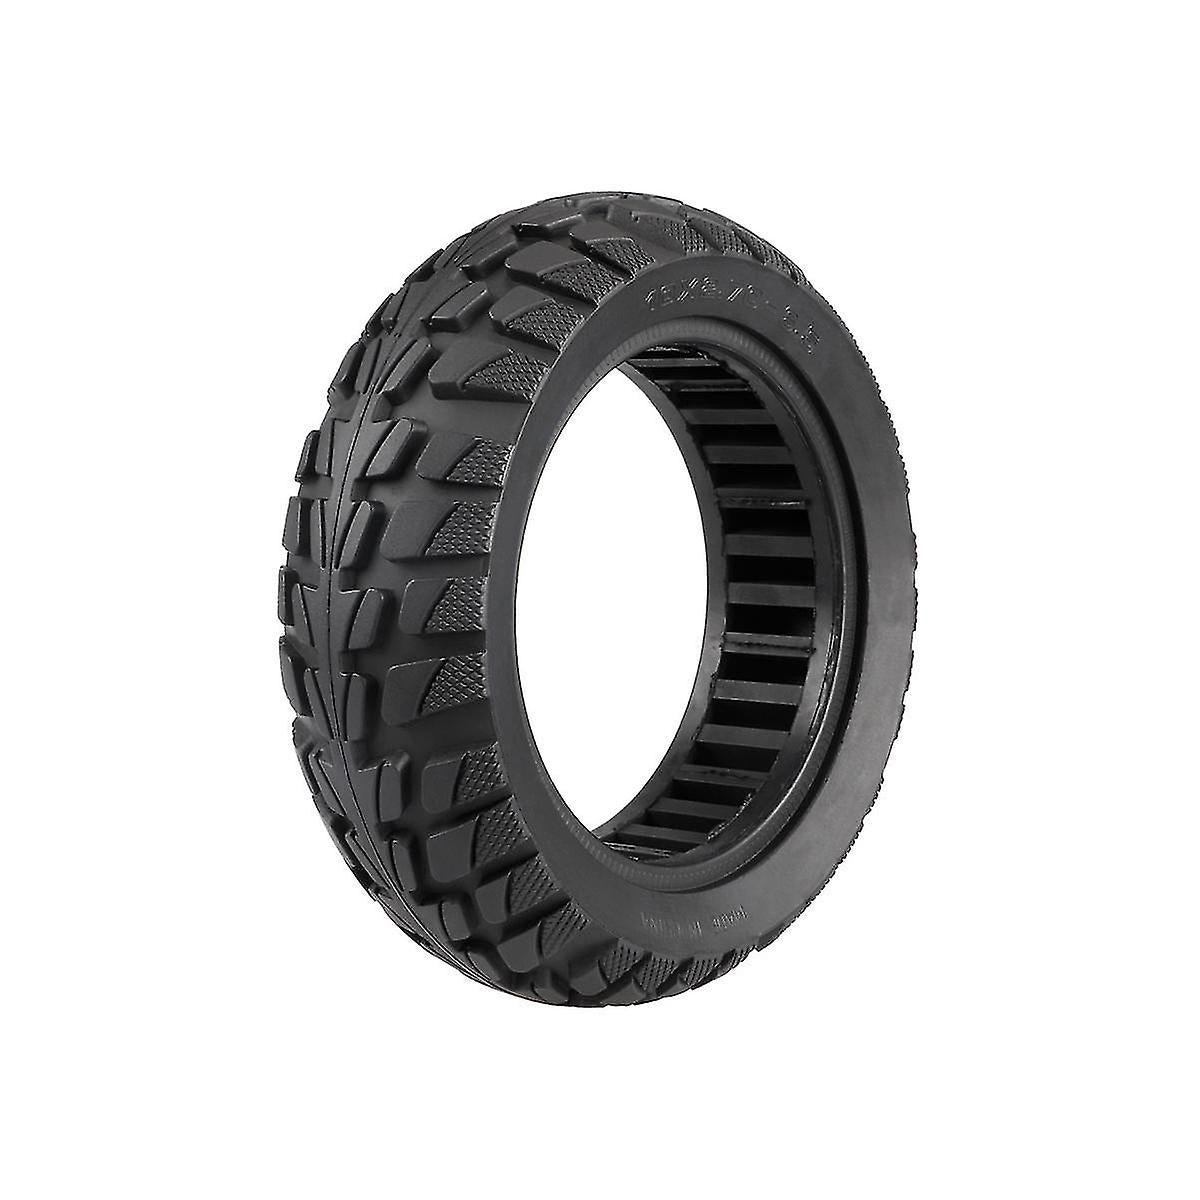 10"x 2.75" Solid Tyre Hybrid Tread Scooter Tubeless Puncture-proof